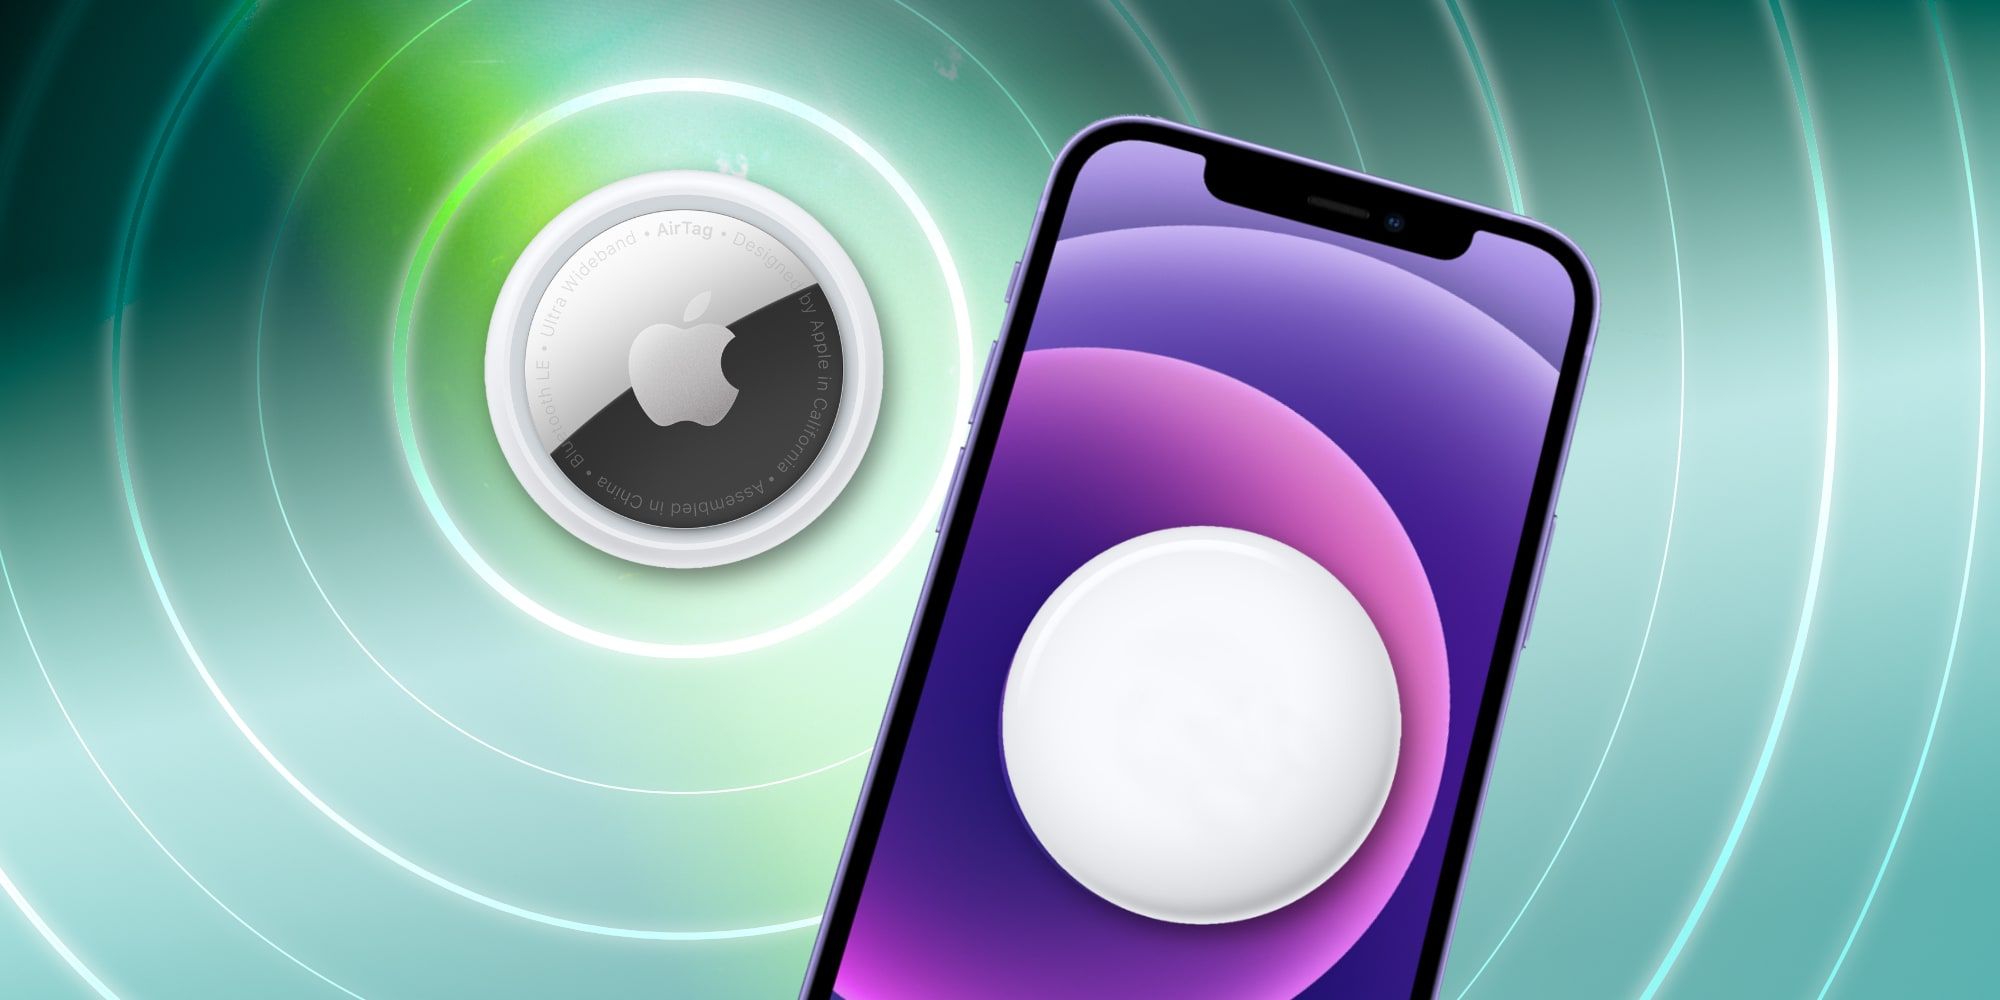 Apple AirTag And iPhone 12 With Concentric Circles